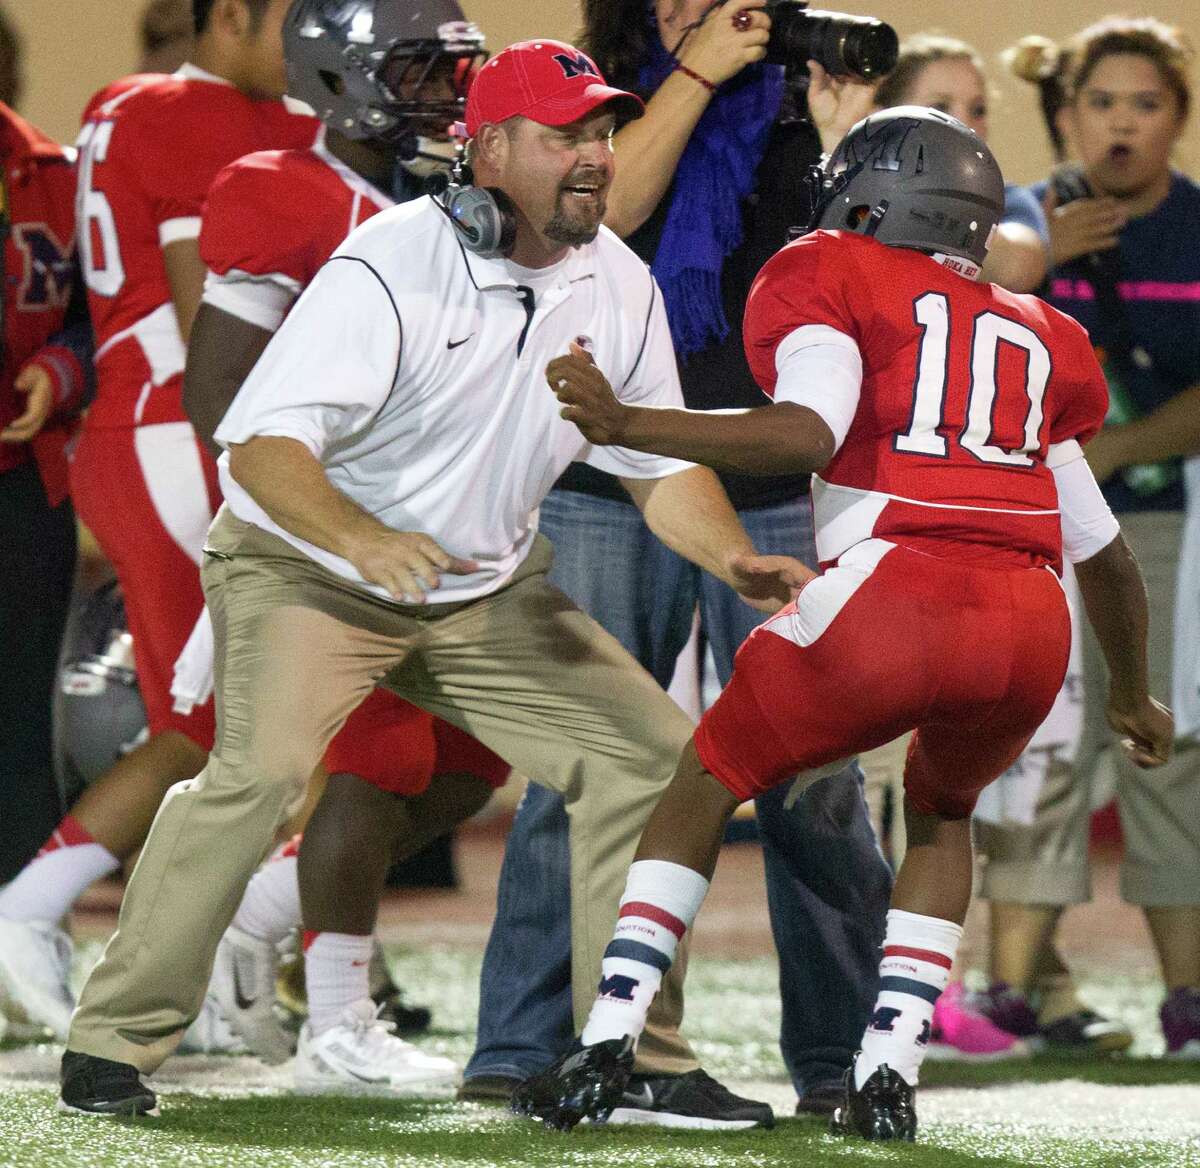 Manvel head coach Kirk Martin and quarterback D'Eriq King (10) are looking to get past rival Katy and win the young program's first state title. ( J. Patric Schneider / For the Chronicle )